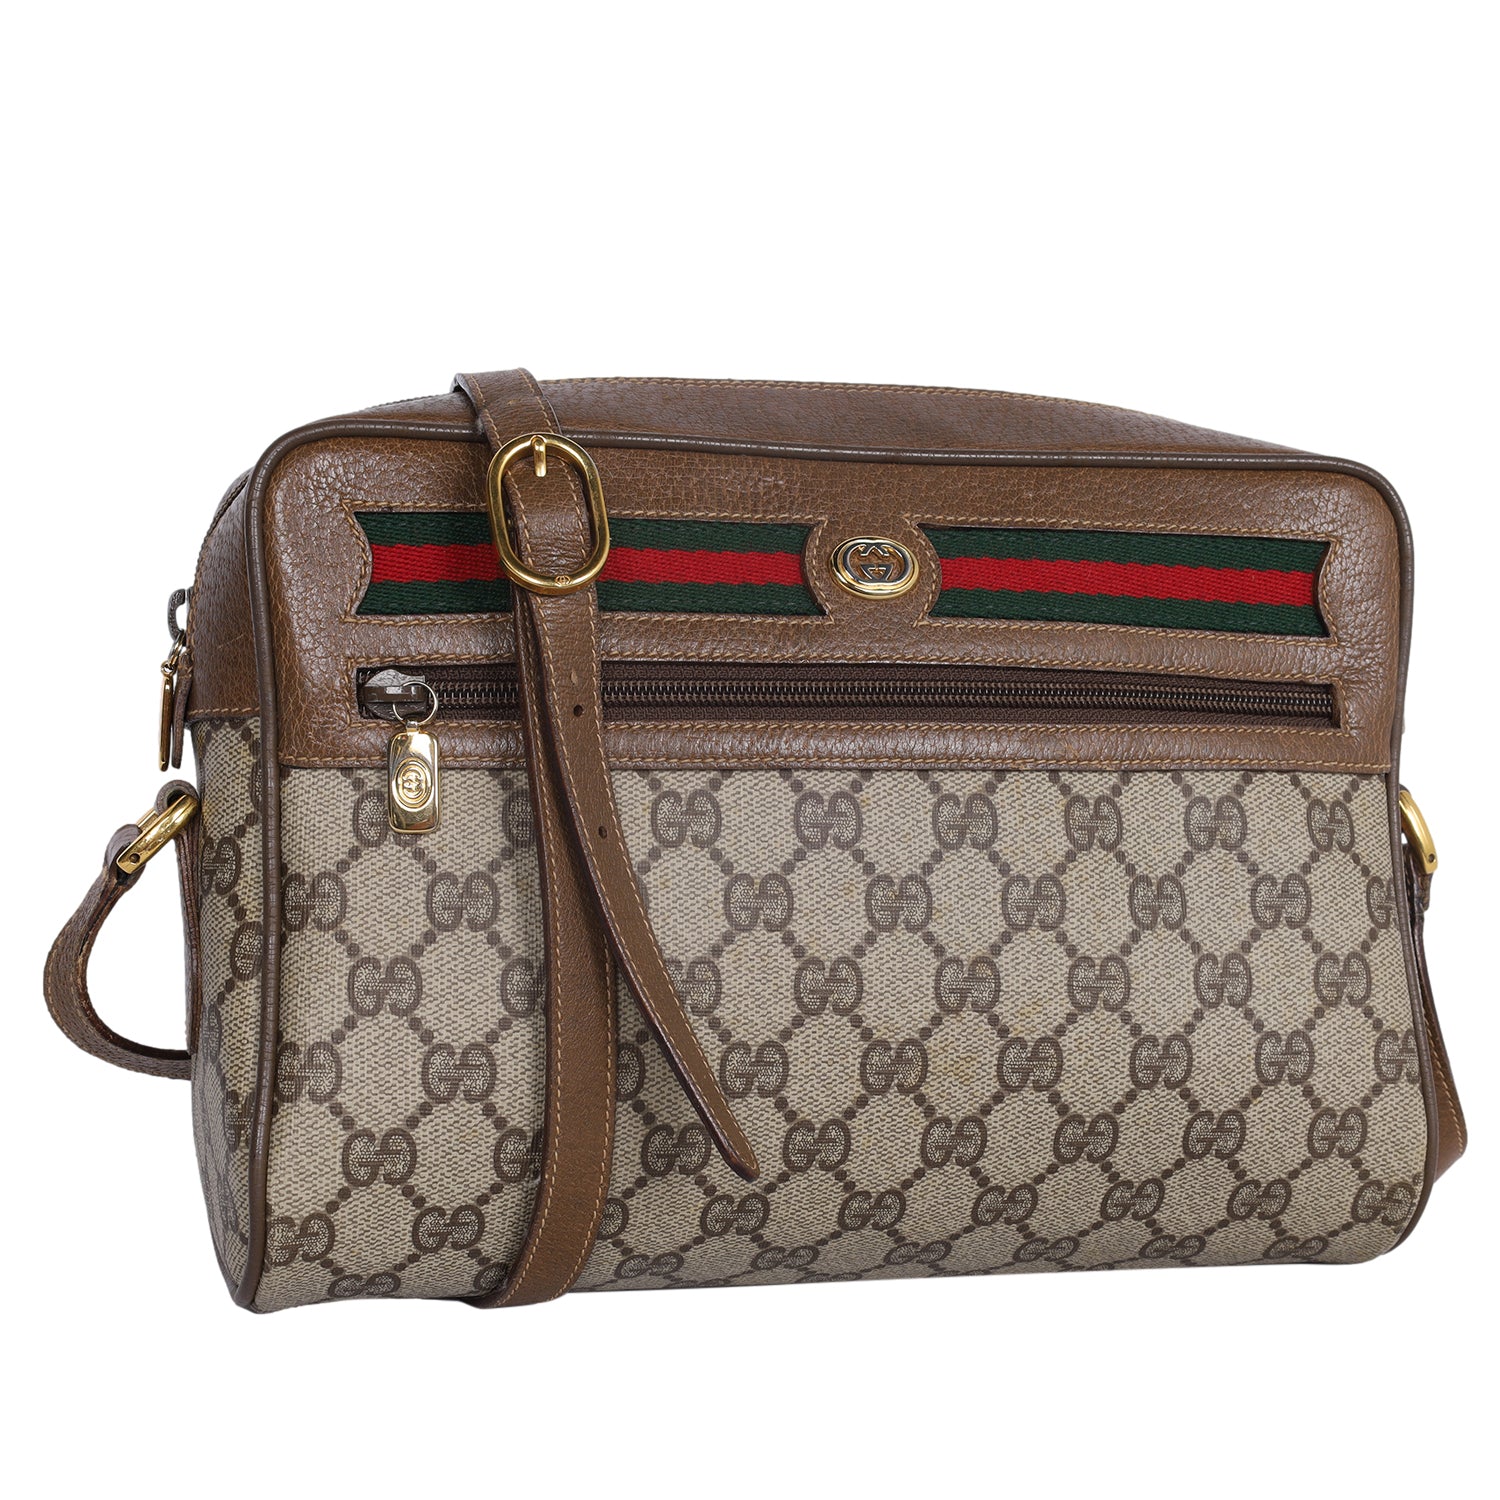 Gucci Ophidia Crossbody Bags